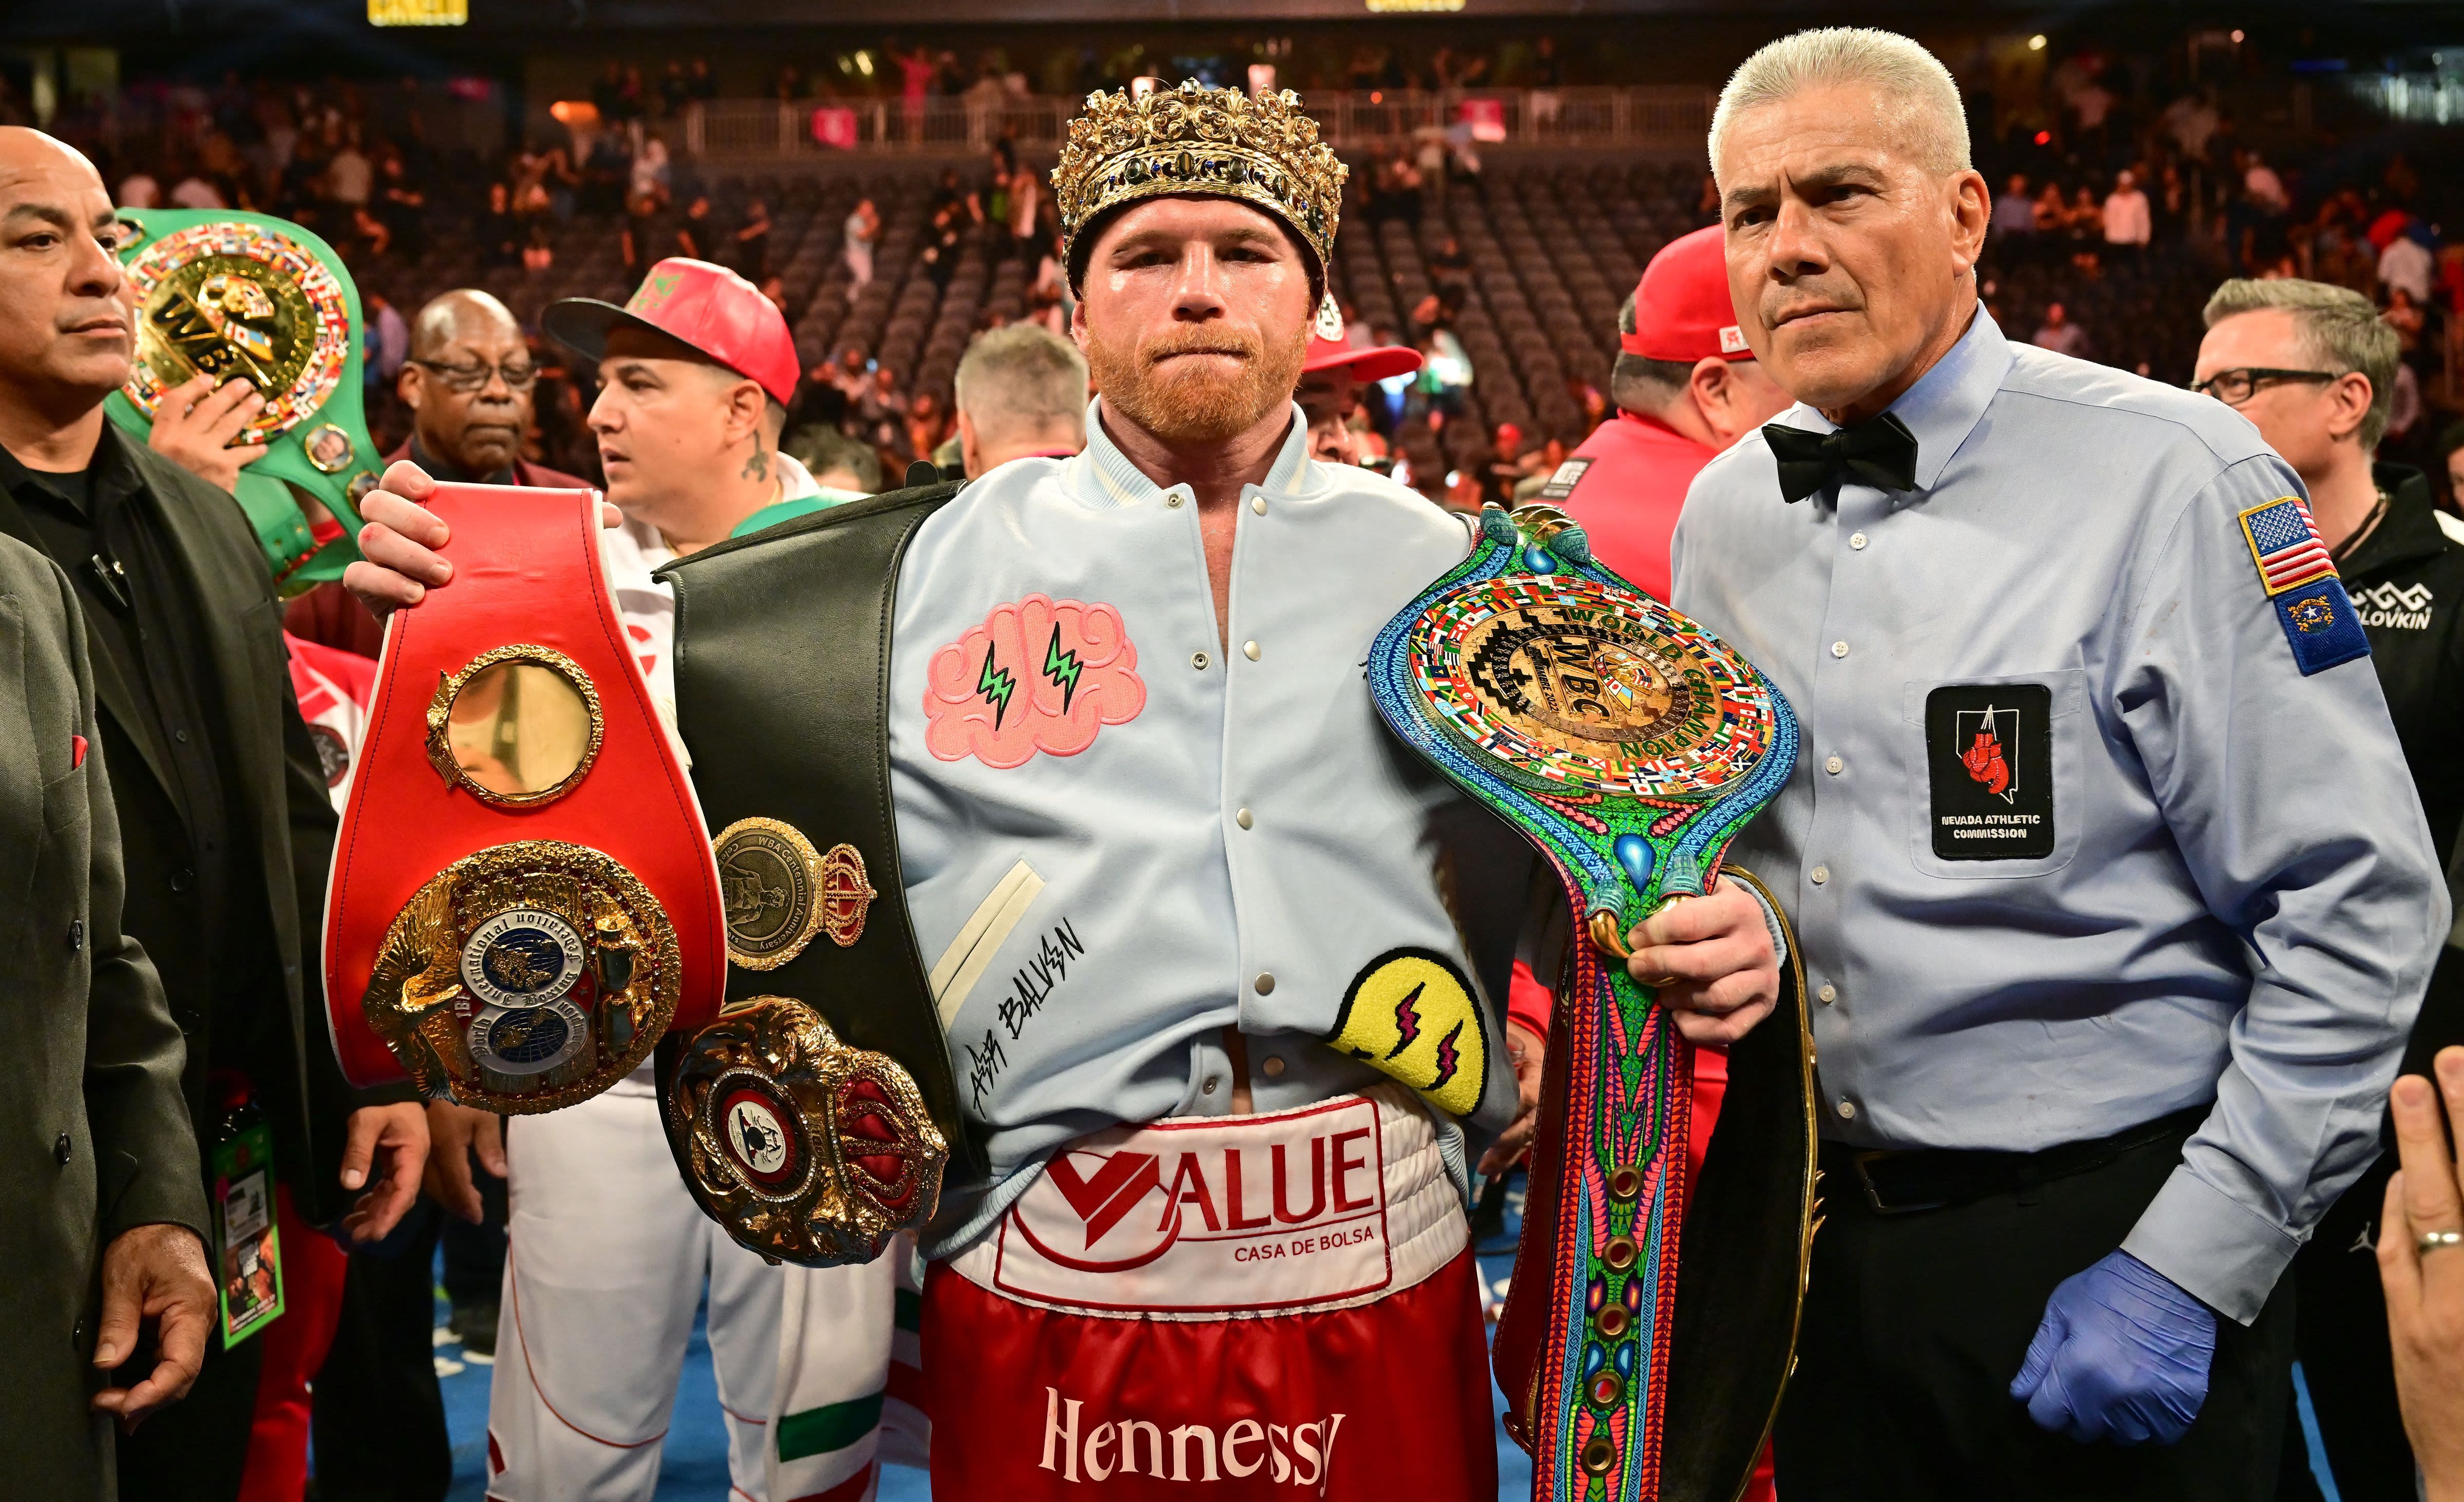 Benavidez's father: Canelo suffers from alcoholism